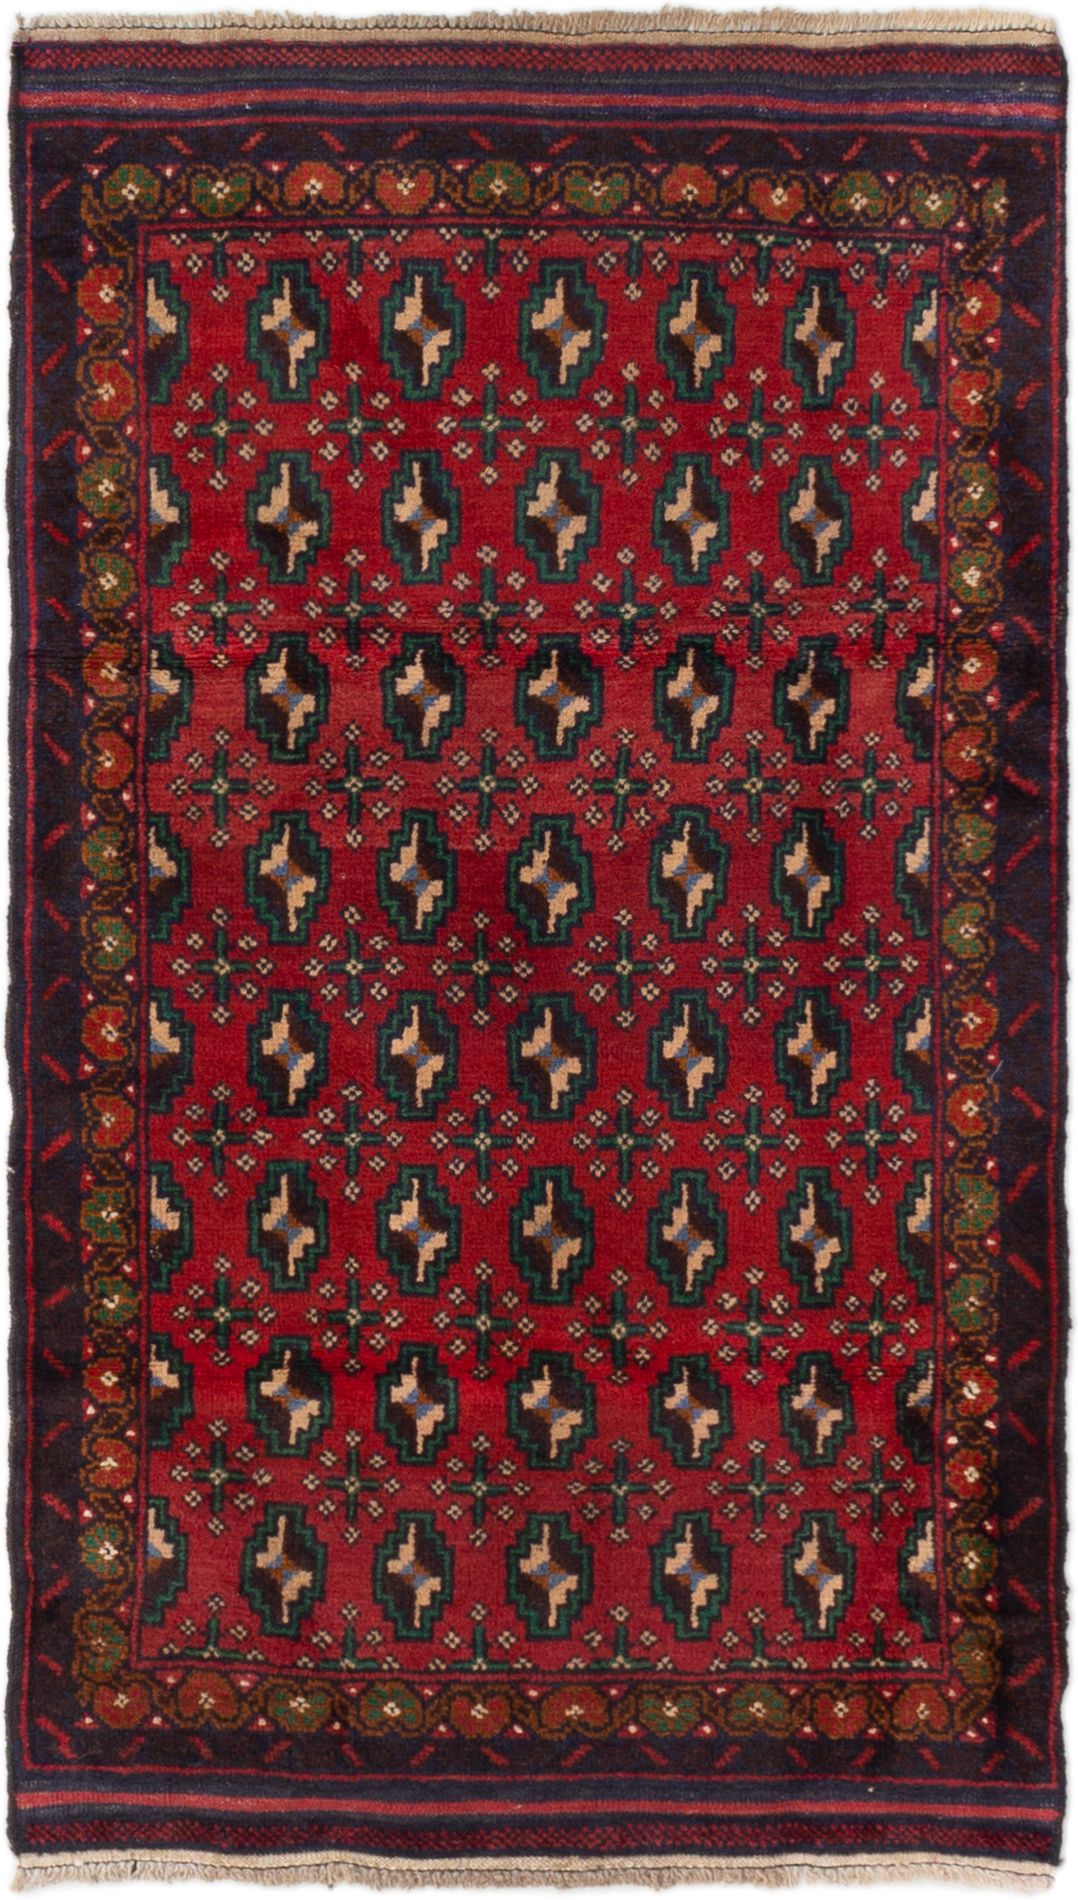 Hand-knotted Teimani Red Wool Rug 2'8" x 4'9" Size: 2'8" x 4'9"  